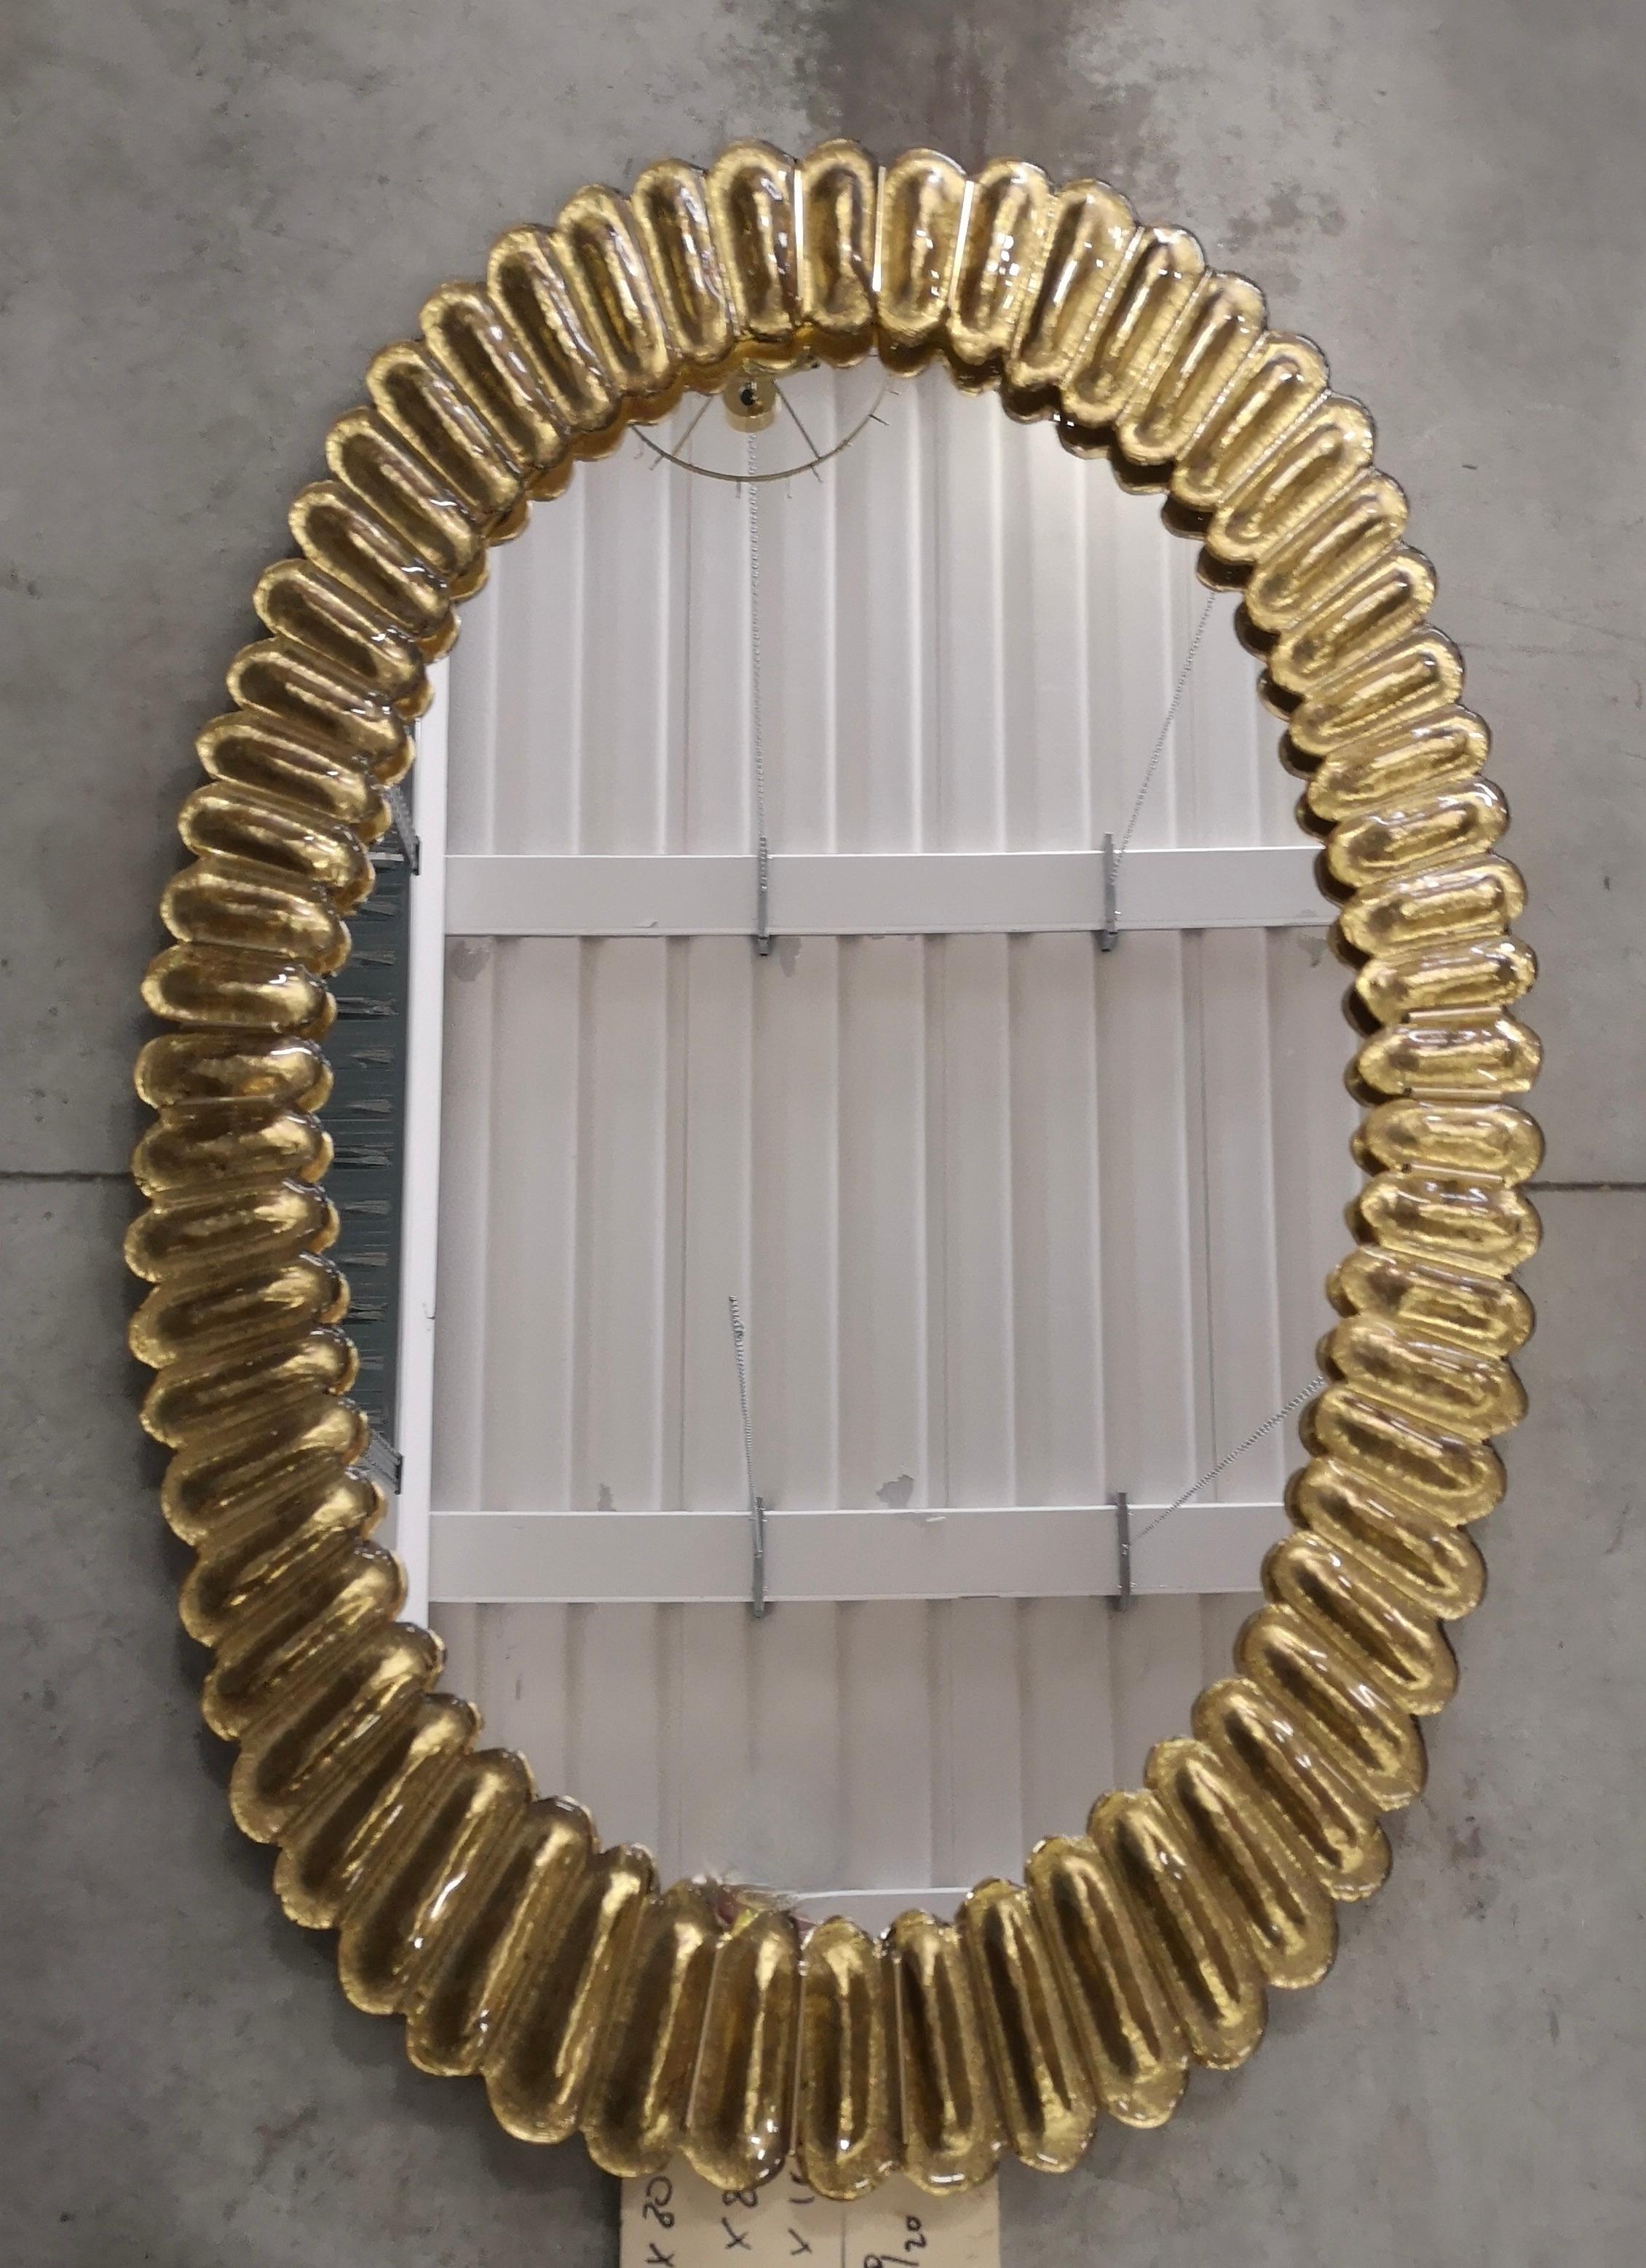 Stunning mirror in blazing gold color Murano glass, Venice. A mirror that alone will furnish your home environment.

The mirror has a rear structure in wood, on which four Murano gold glass sections are mounted to form an oval as in the photograph.